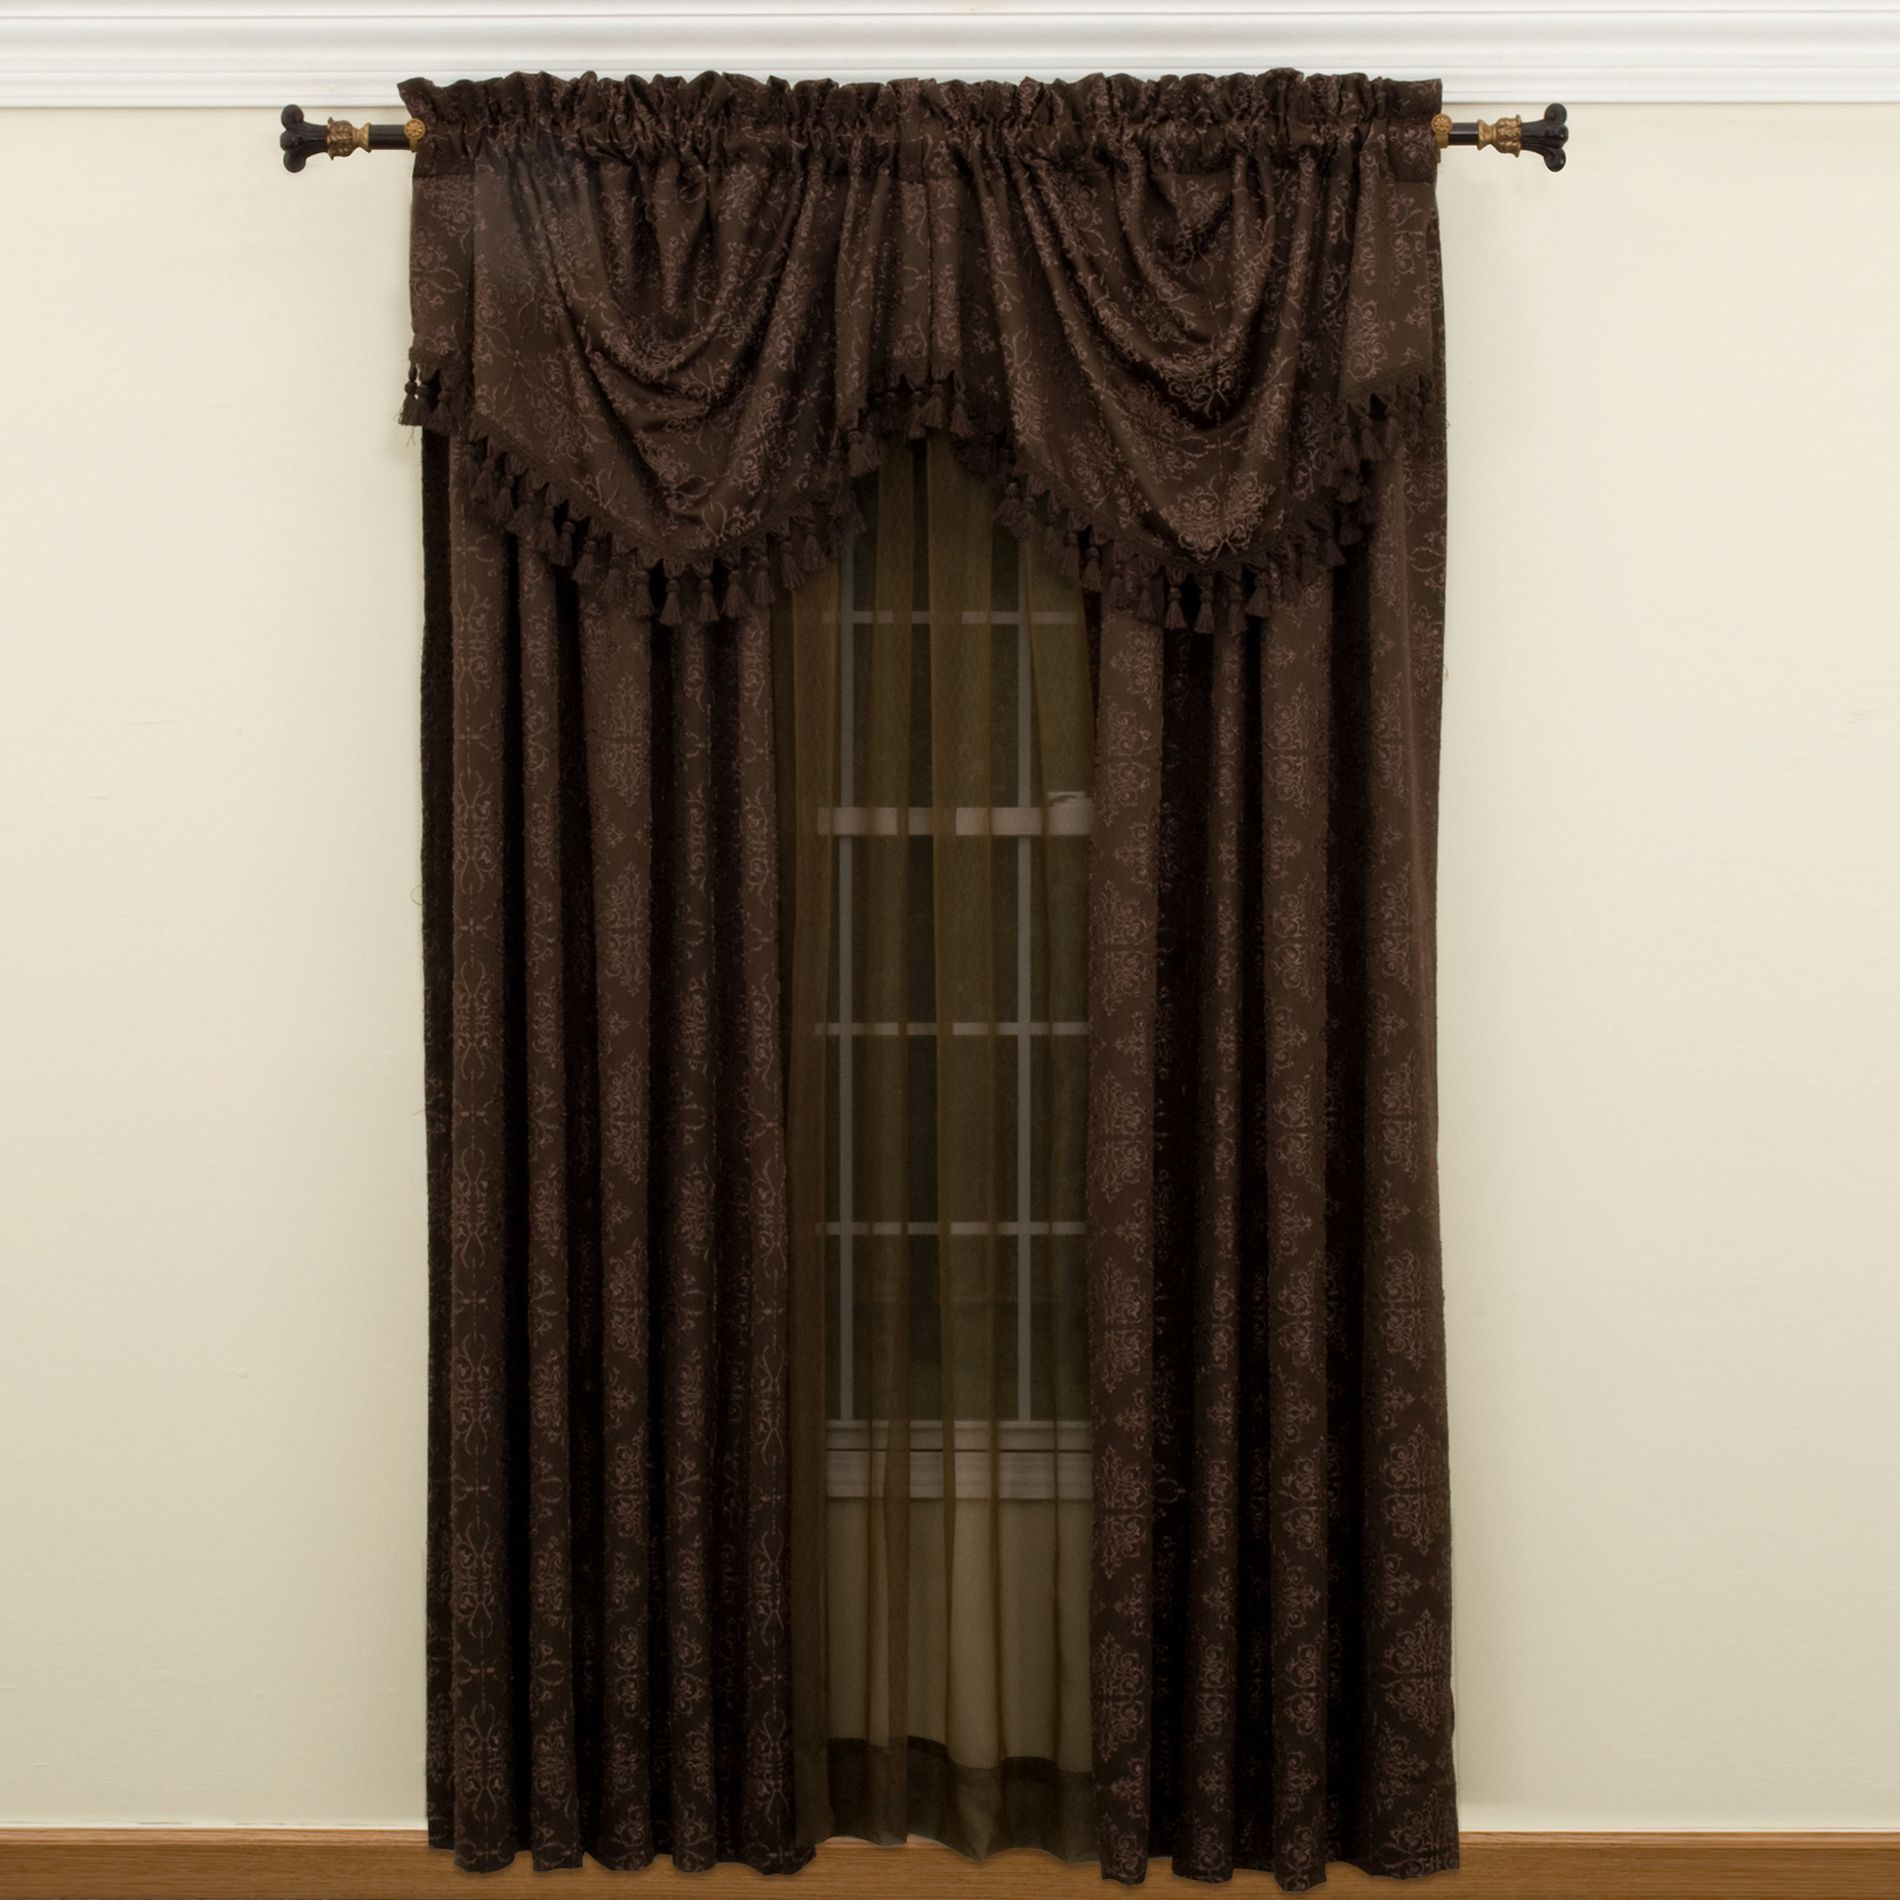 Country Living 54 in. x 84 in. Cambridge Damask Window Panel